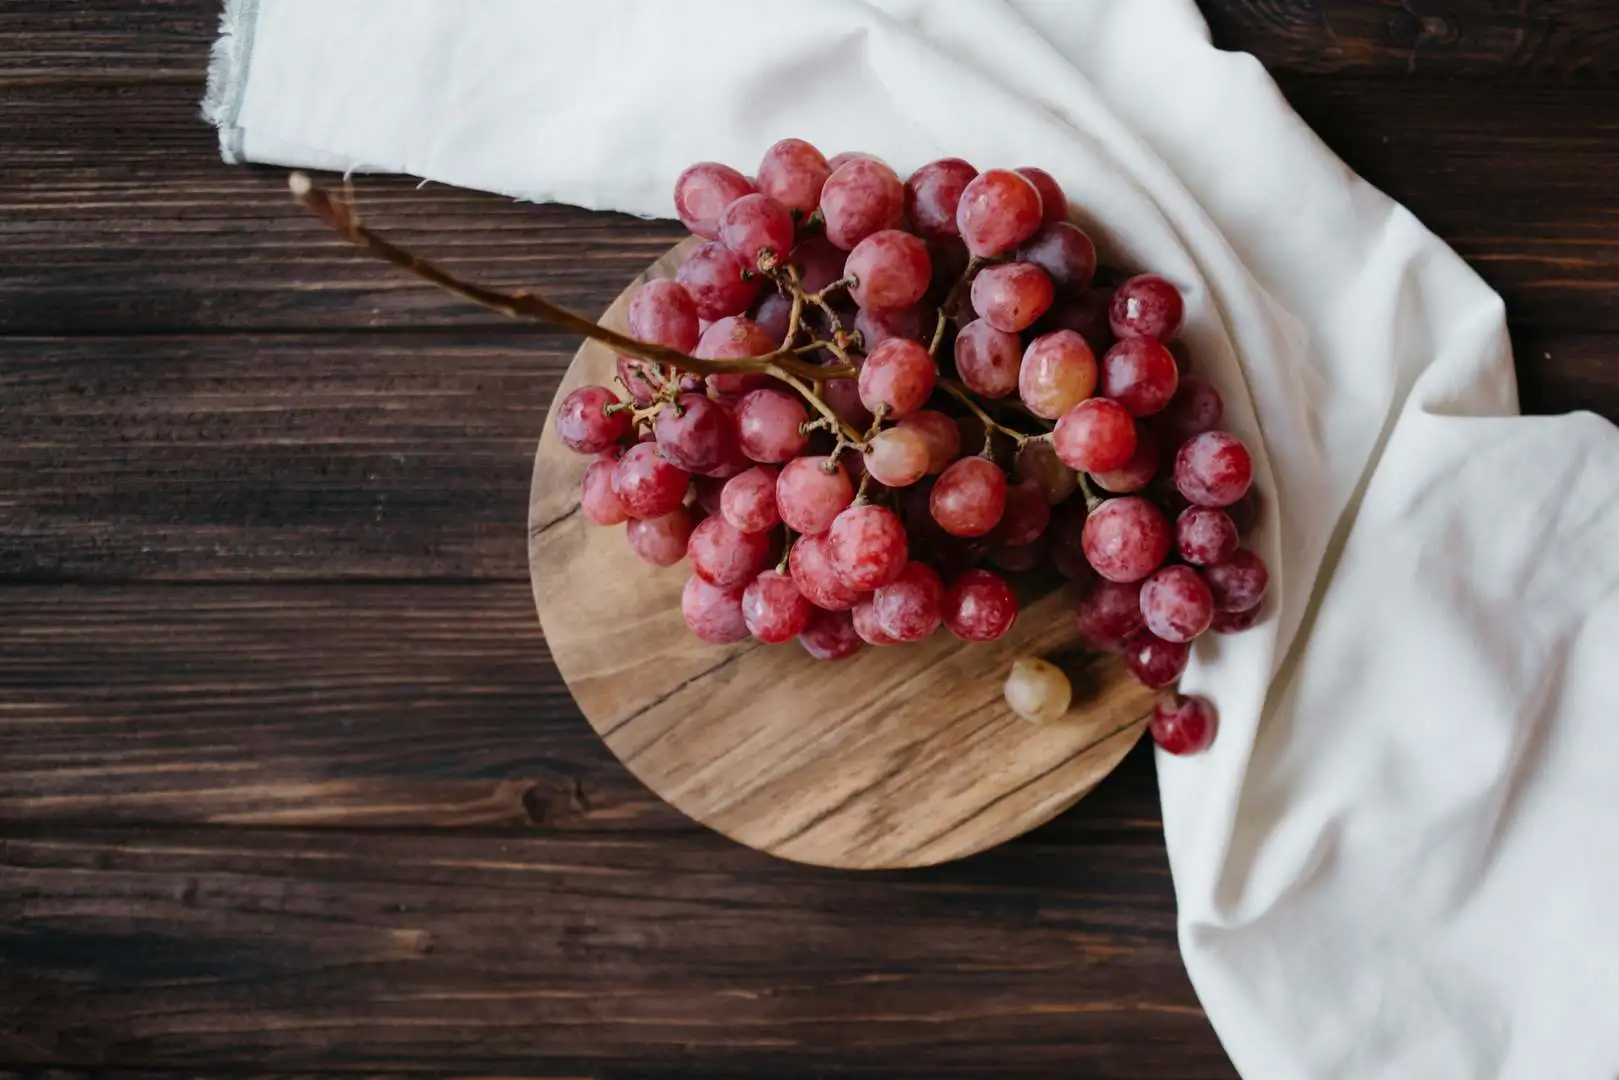 12 health benefits of eating grapes